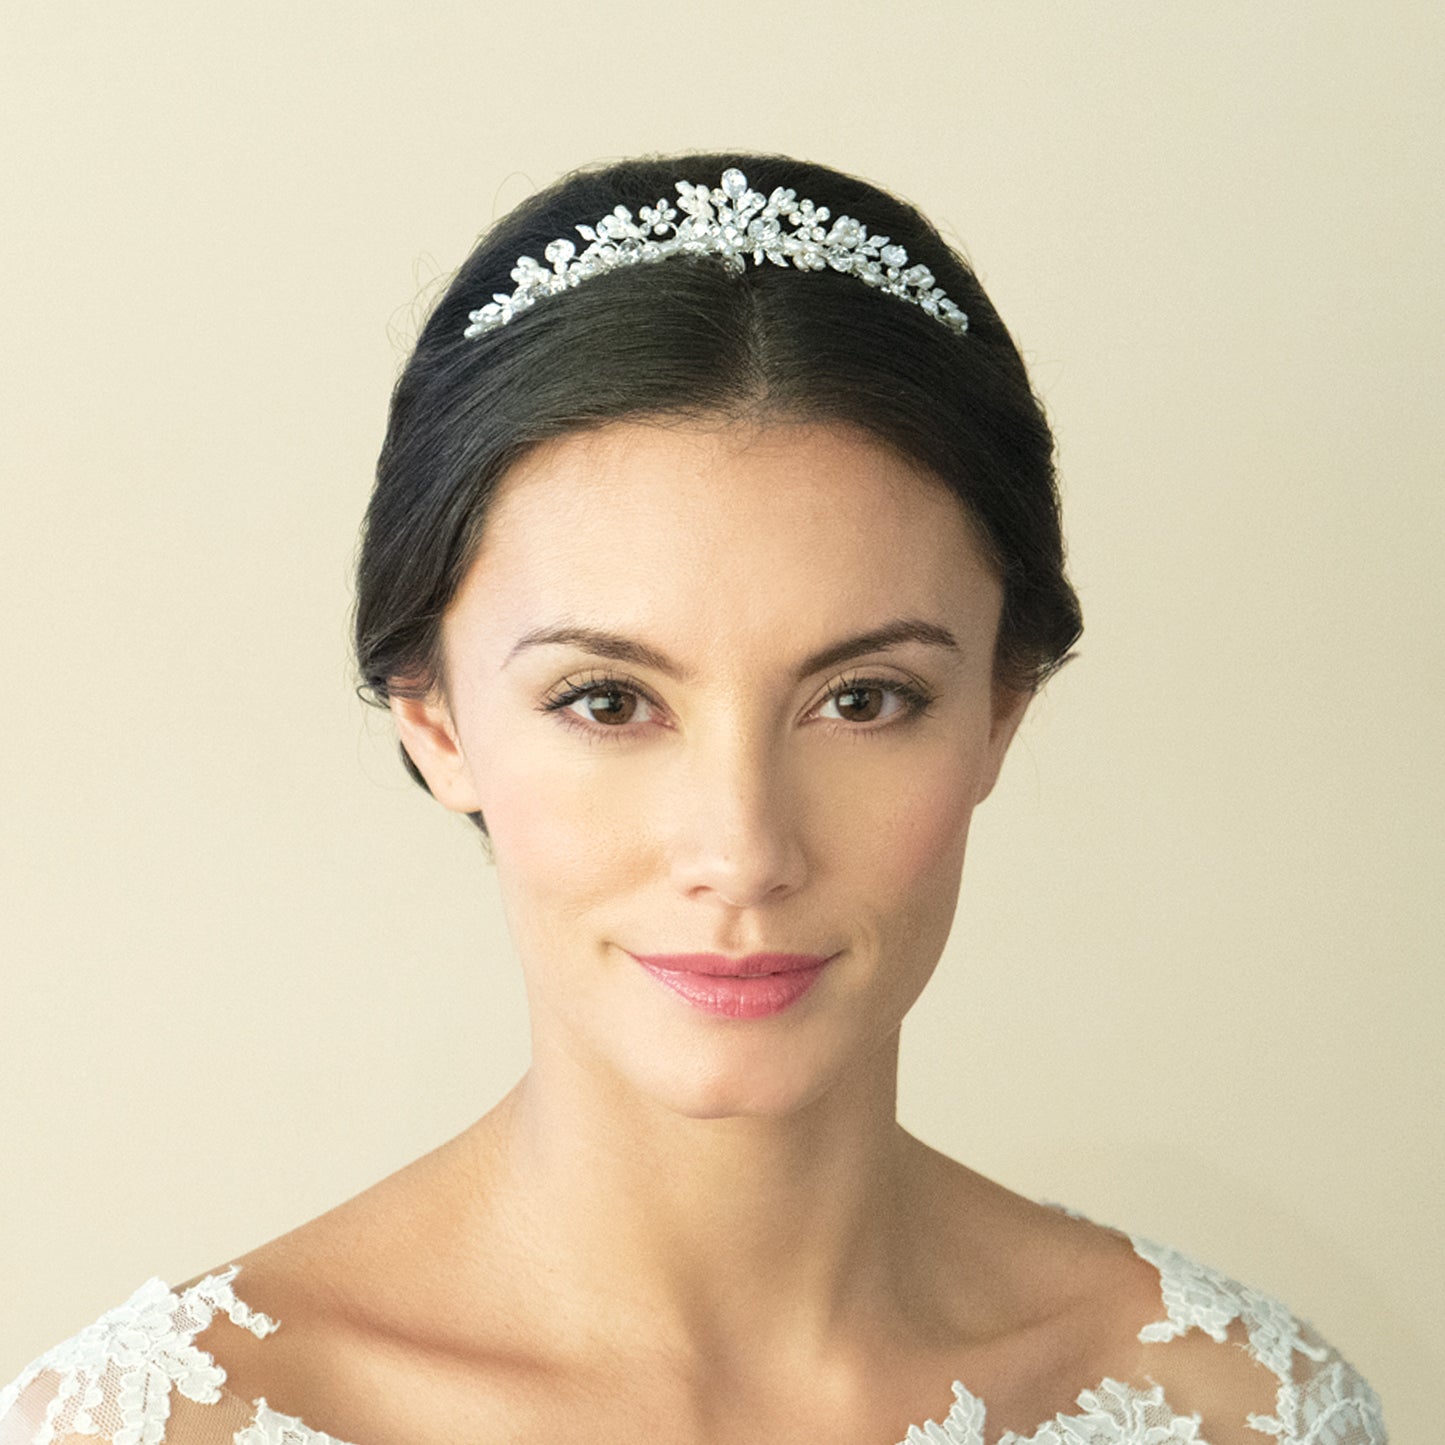 Millie - Silver Crystal and Pearl Delicate Floral Tiara